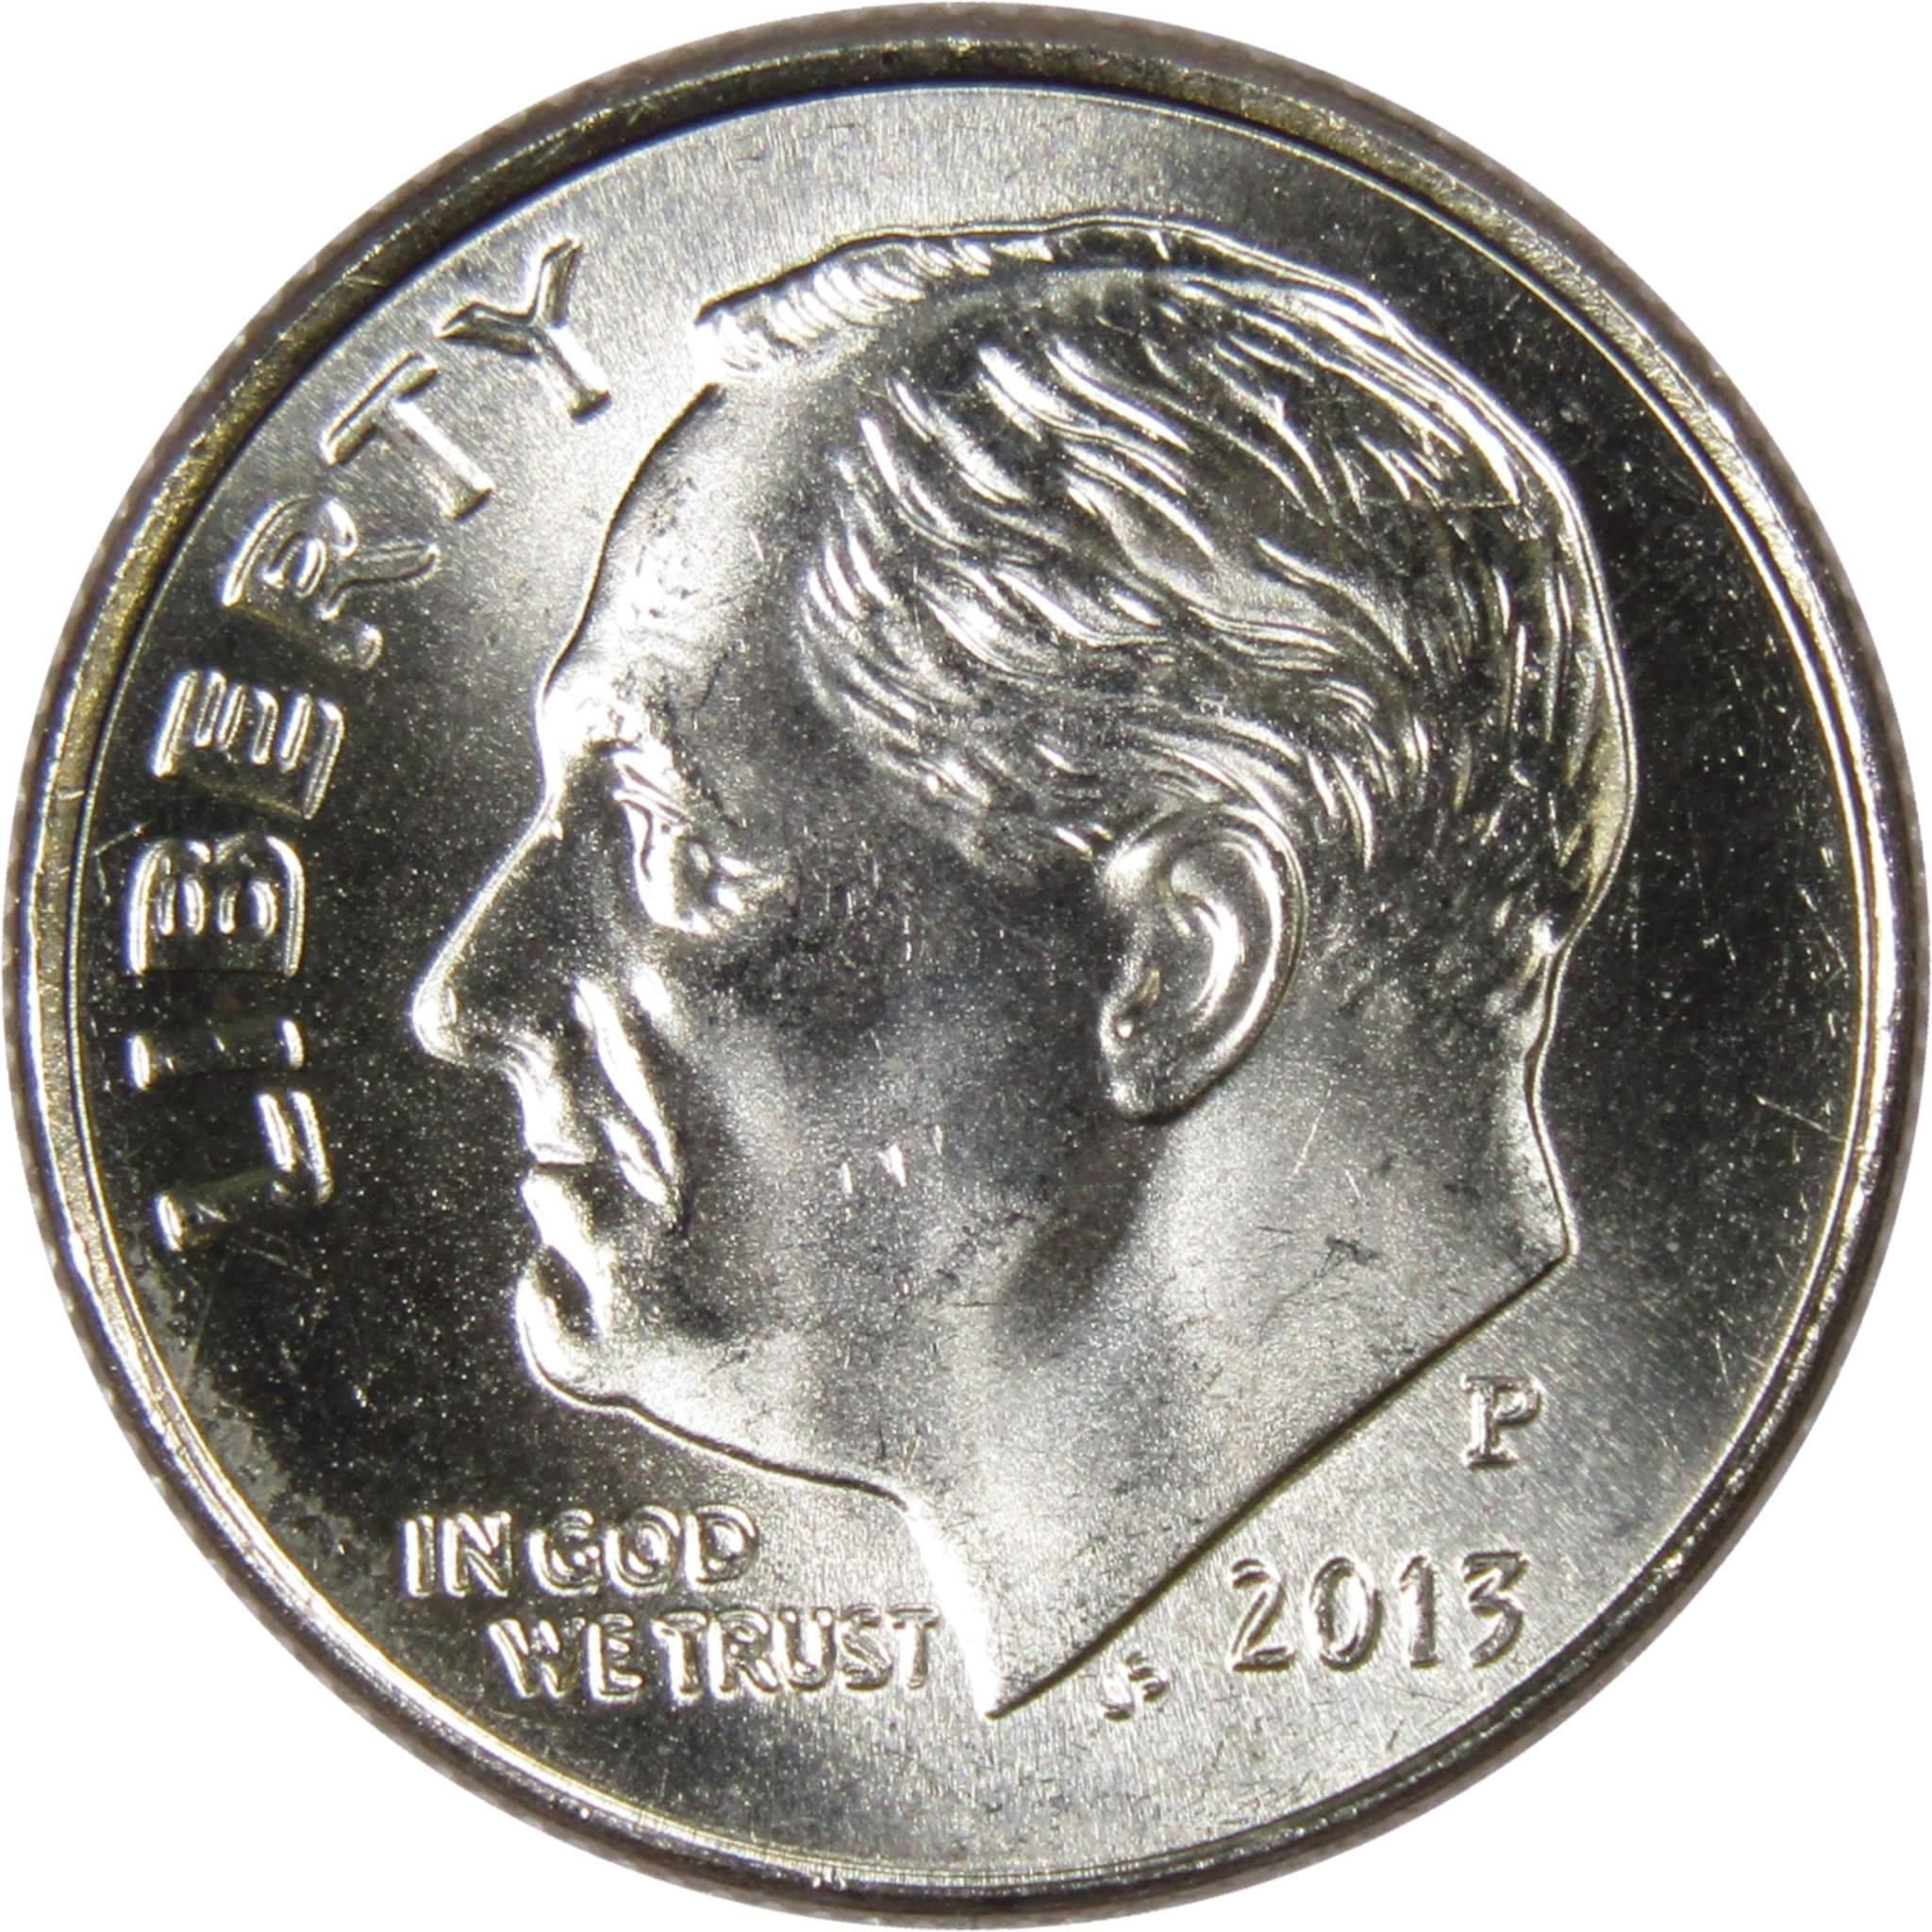 2013 P Roosevelt Dime BU Uncirculated Mint State 10c US Coin Collectible